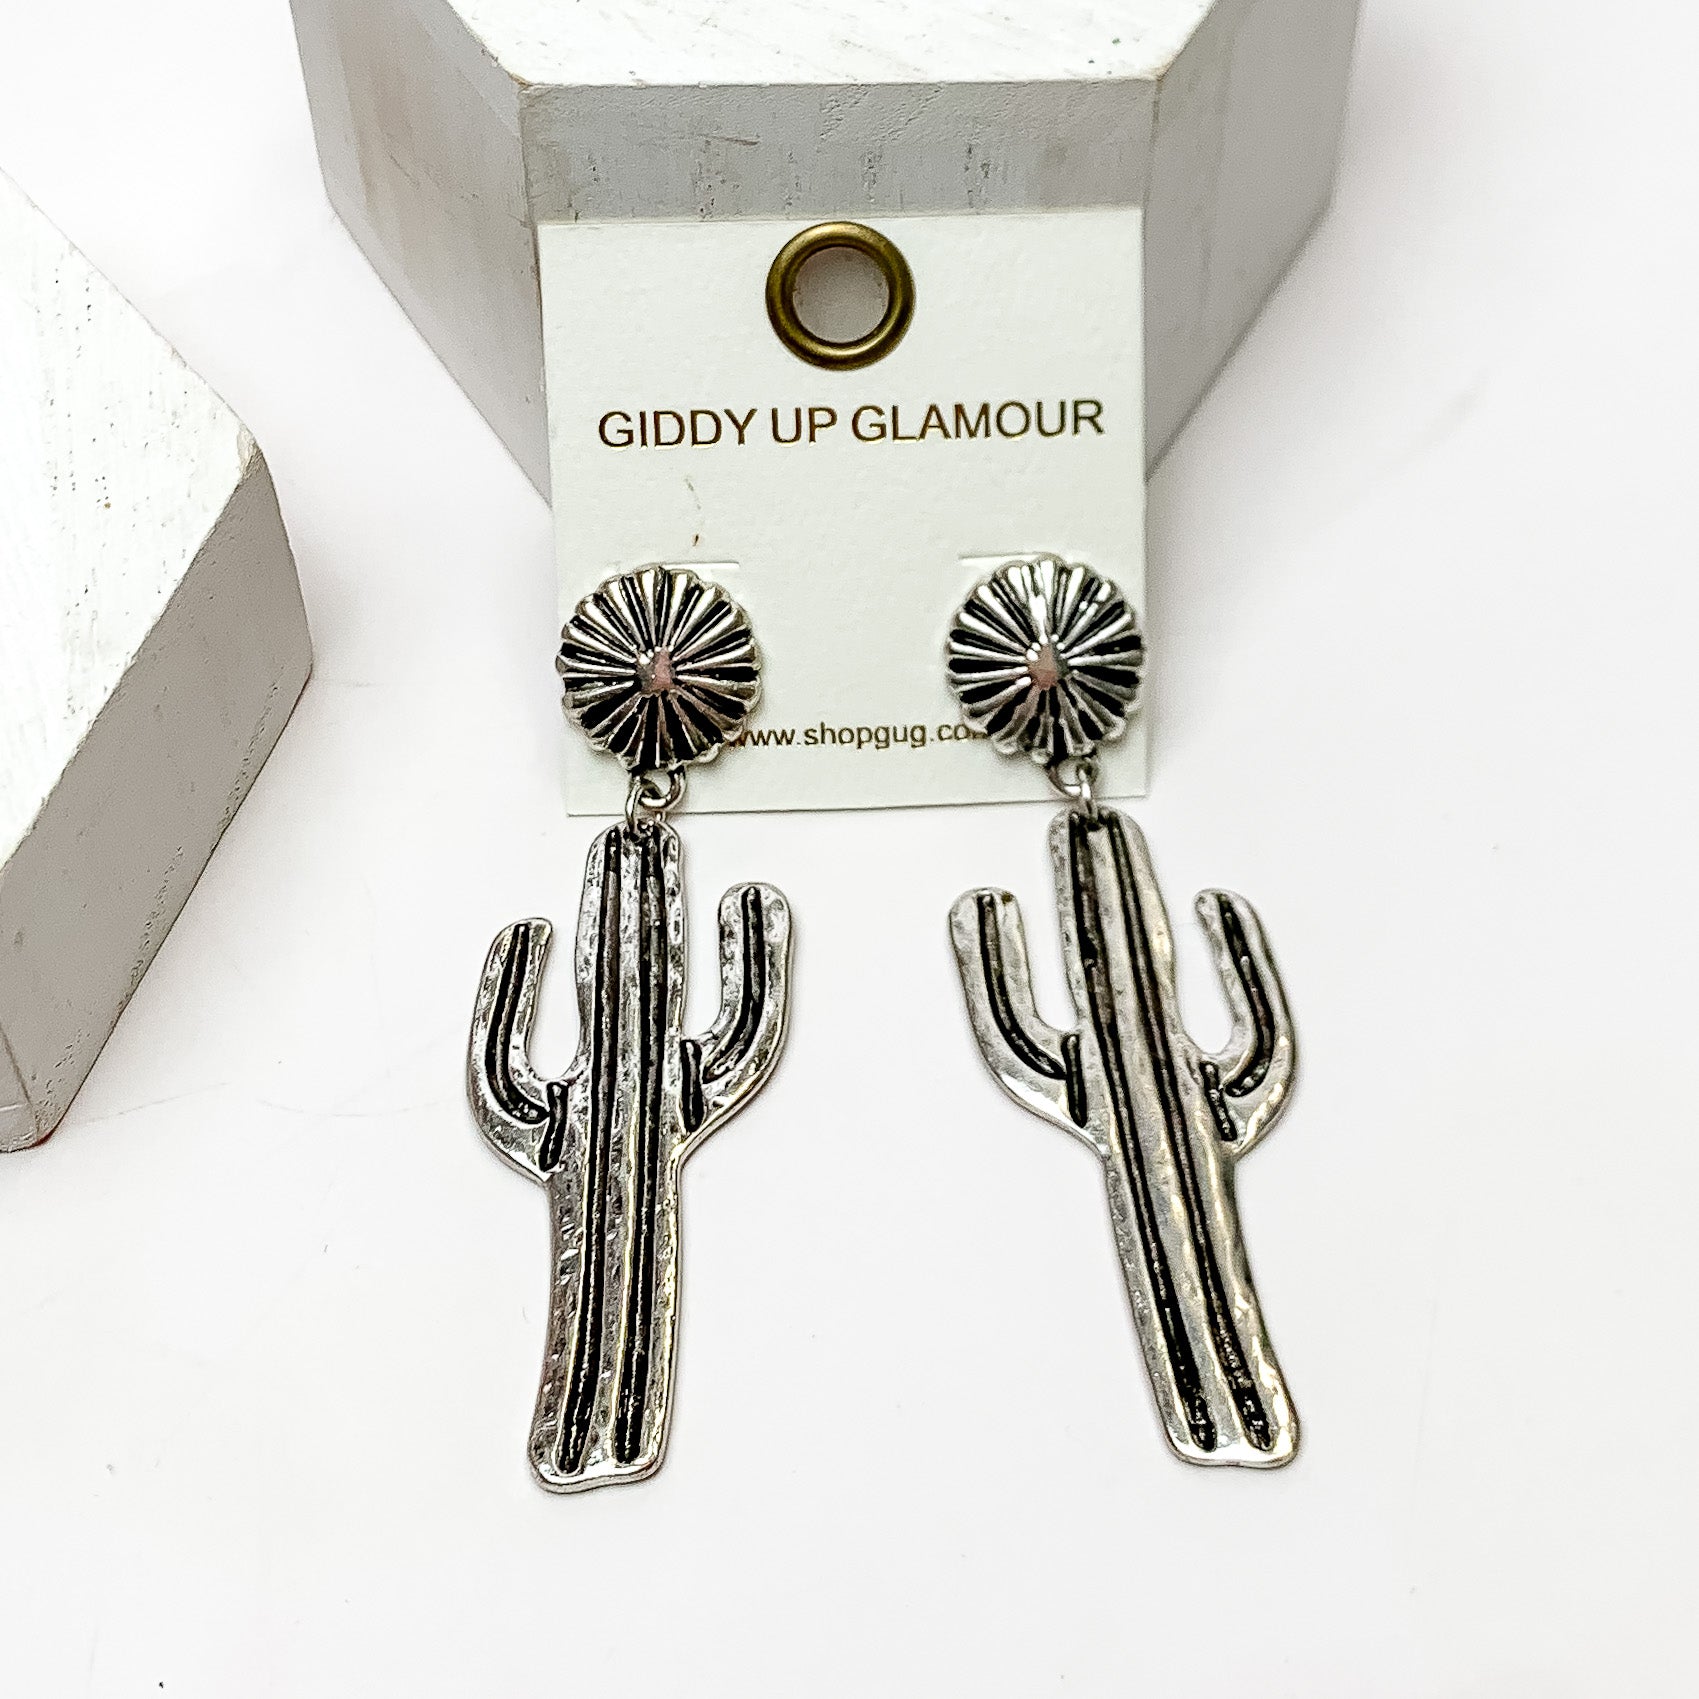 Country cactus silver earrings. These earrings are pictured on a white background with plants behind for decoration.